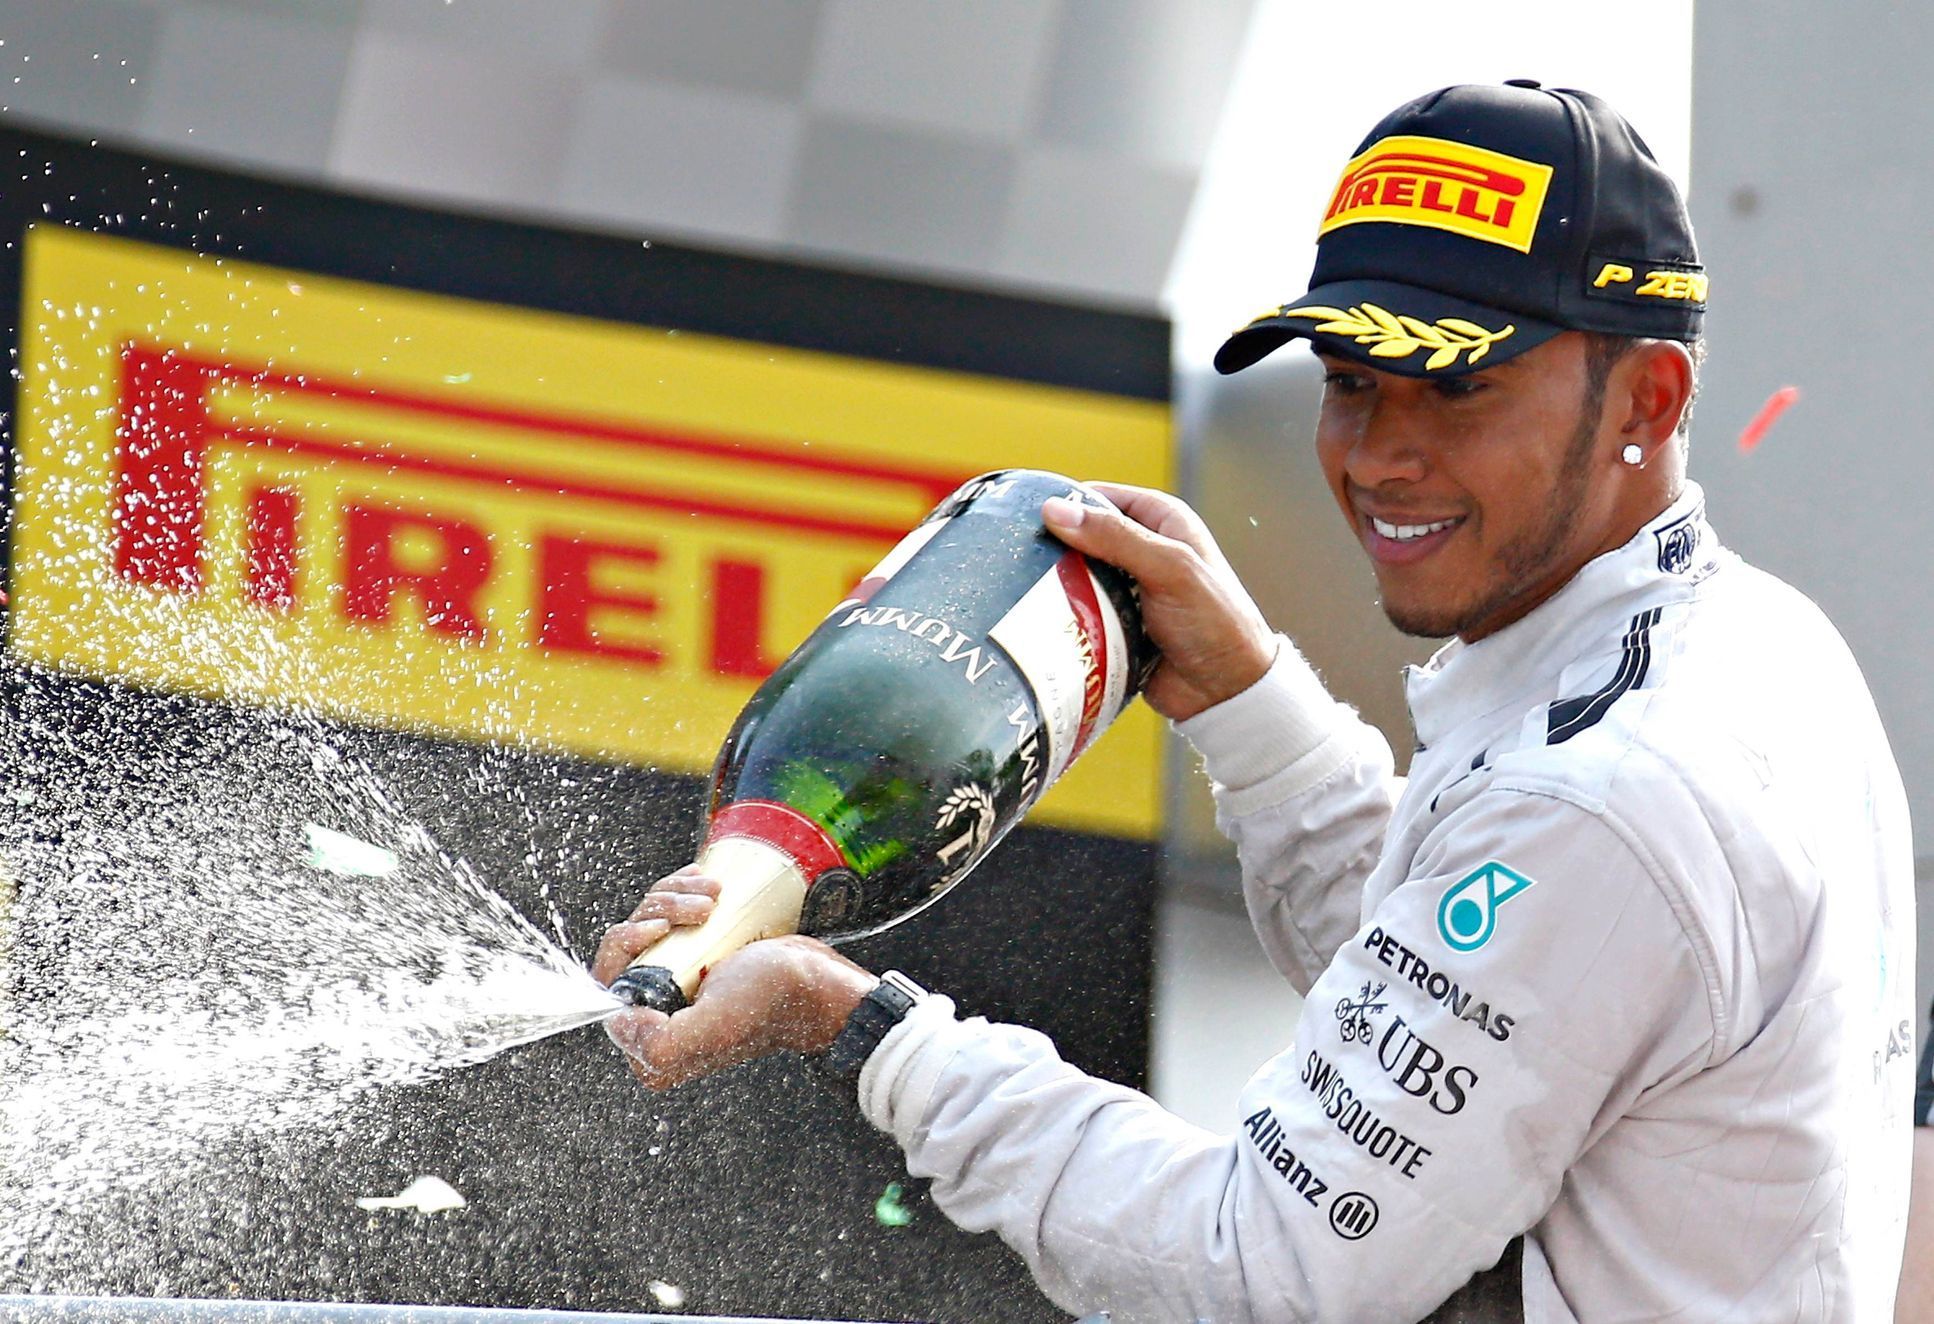 Mercedes Formula One driver Hamilton of Britain celebrates with champagne after winning the Italian F1 Grand Prix in Monza